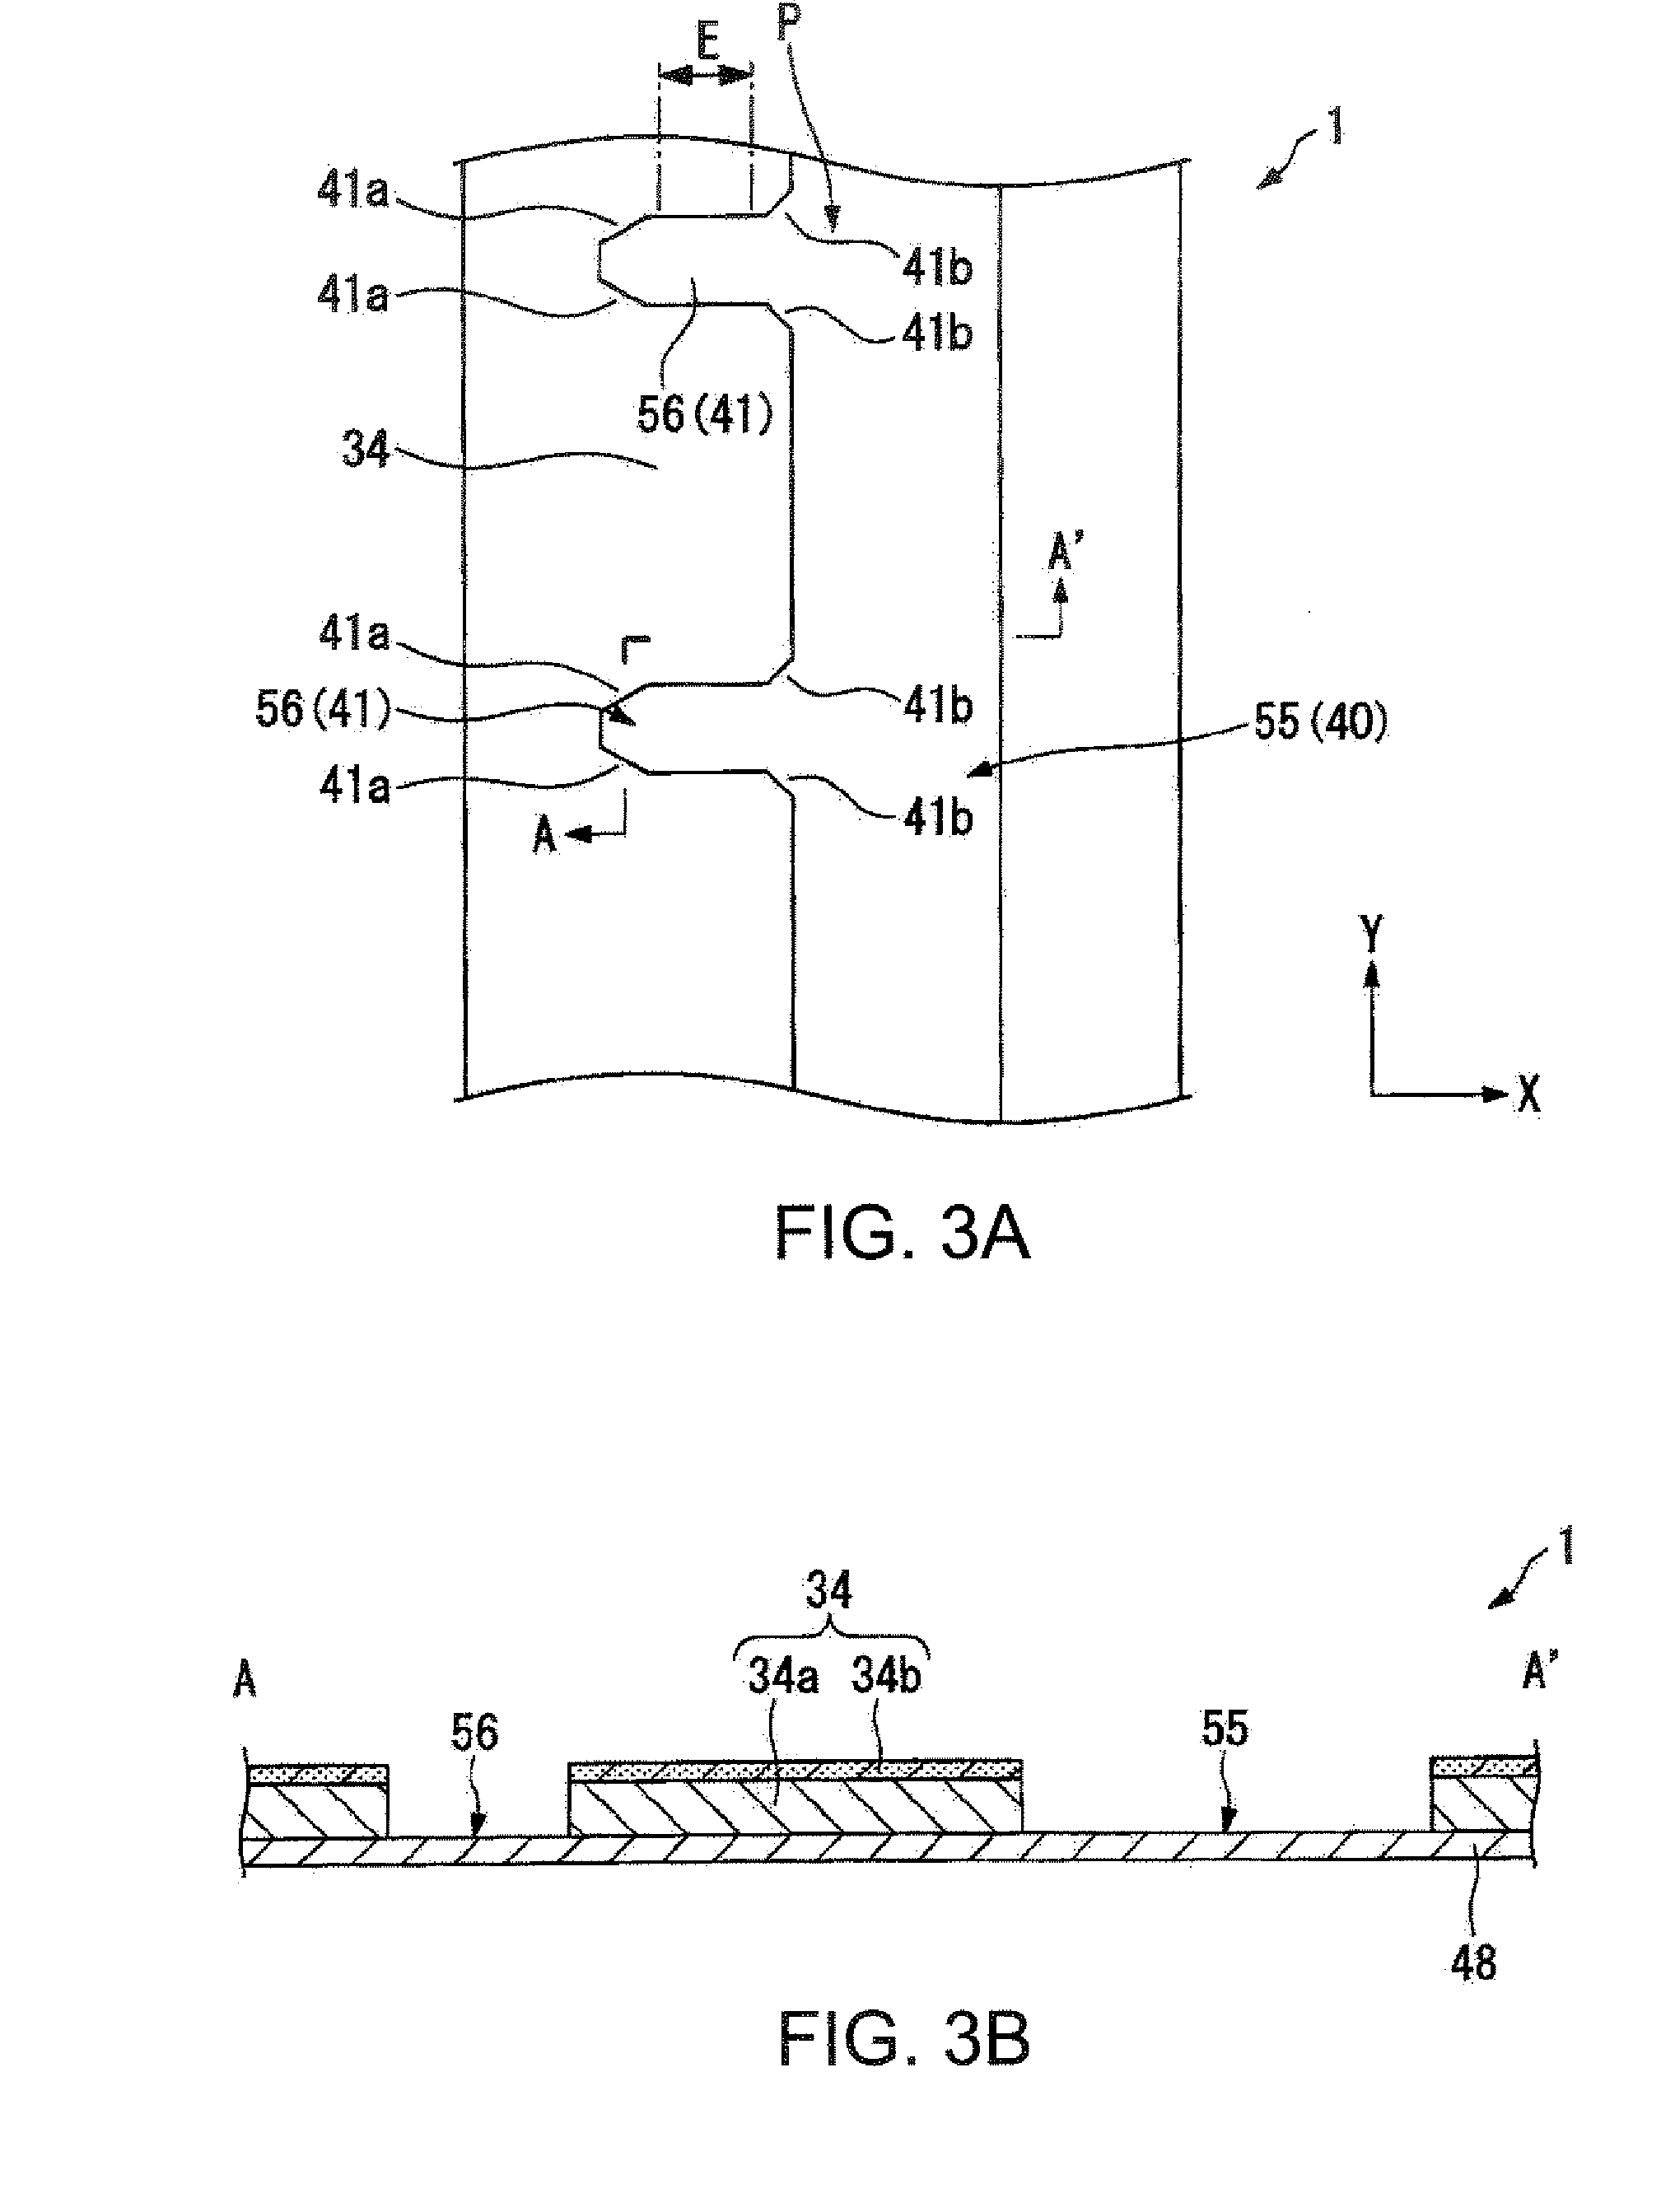 Film pattern forming method, device, electro-optical apparatus, and electronic appliance